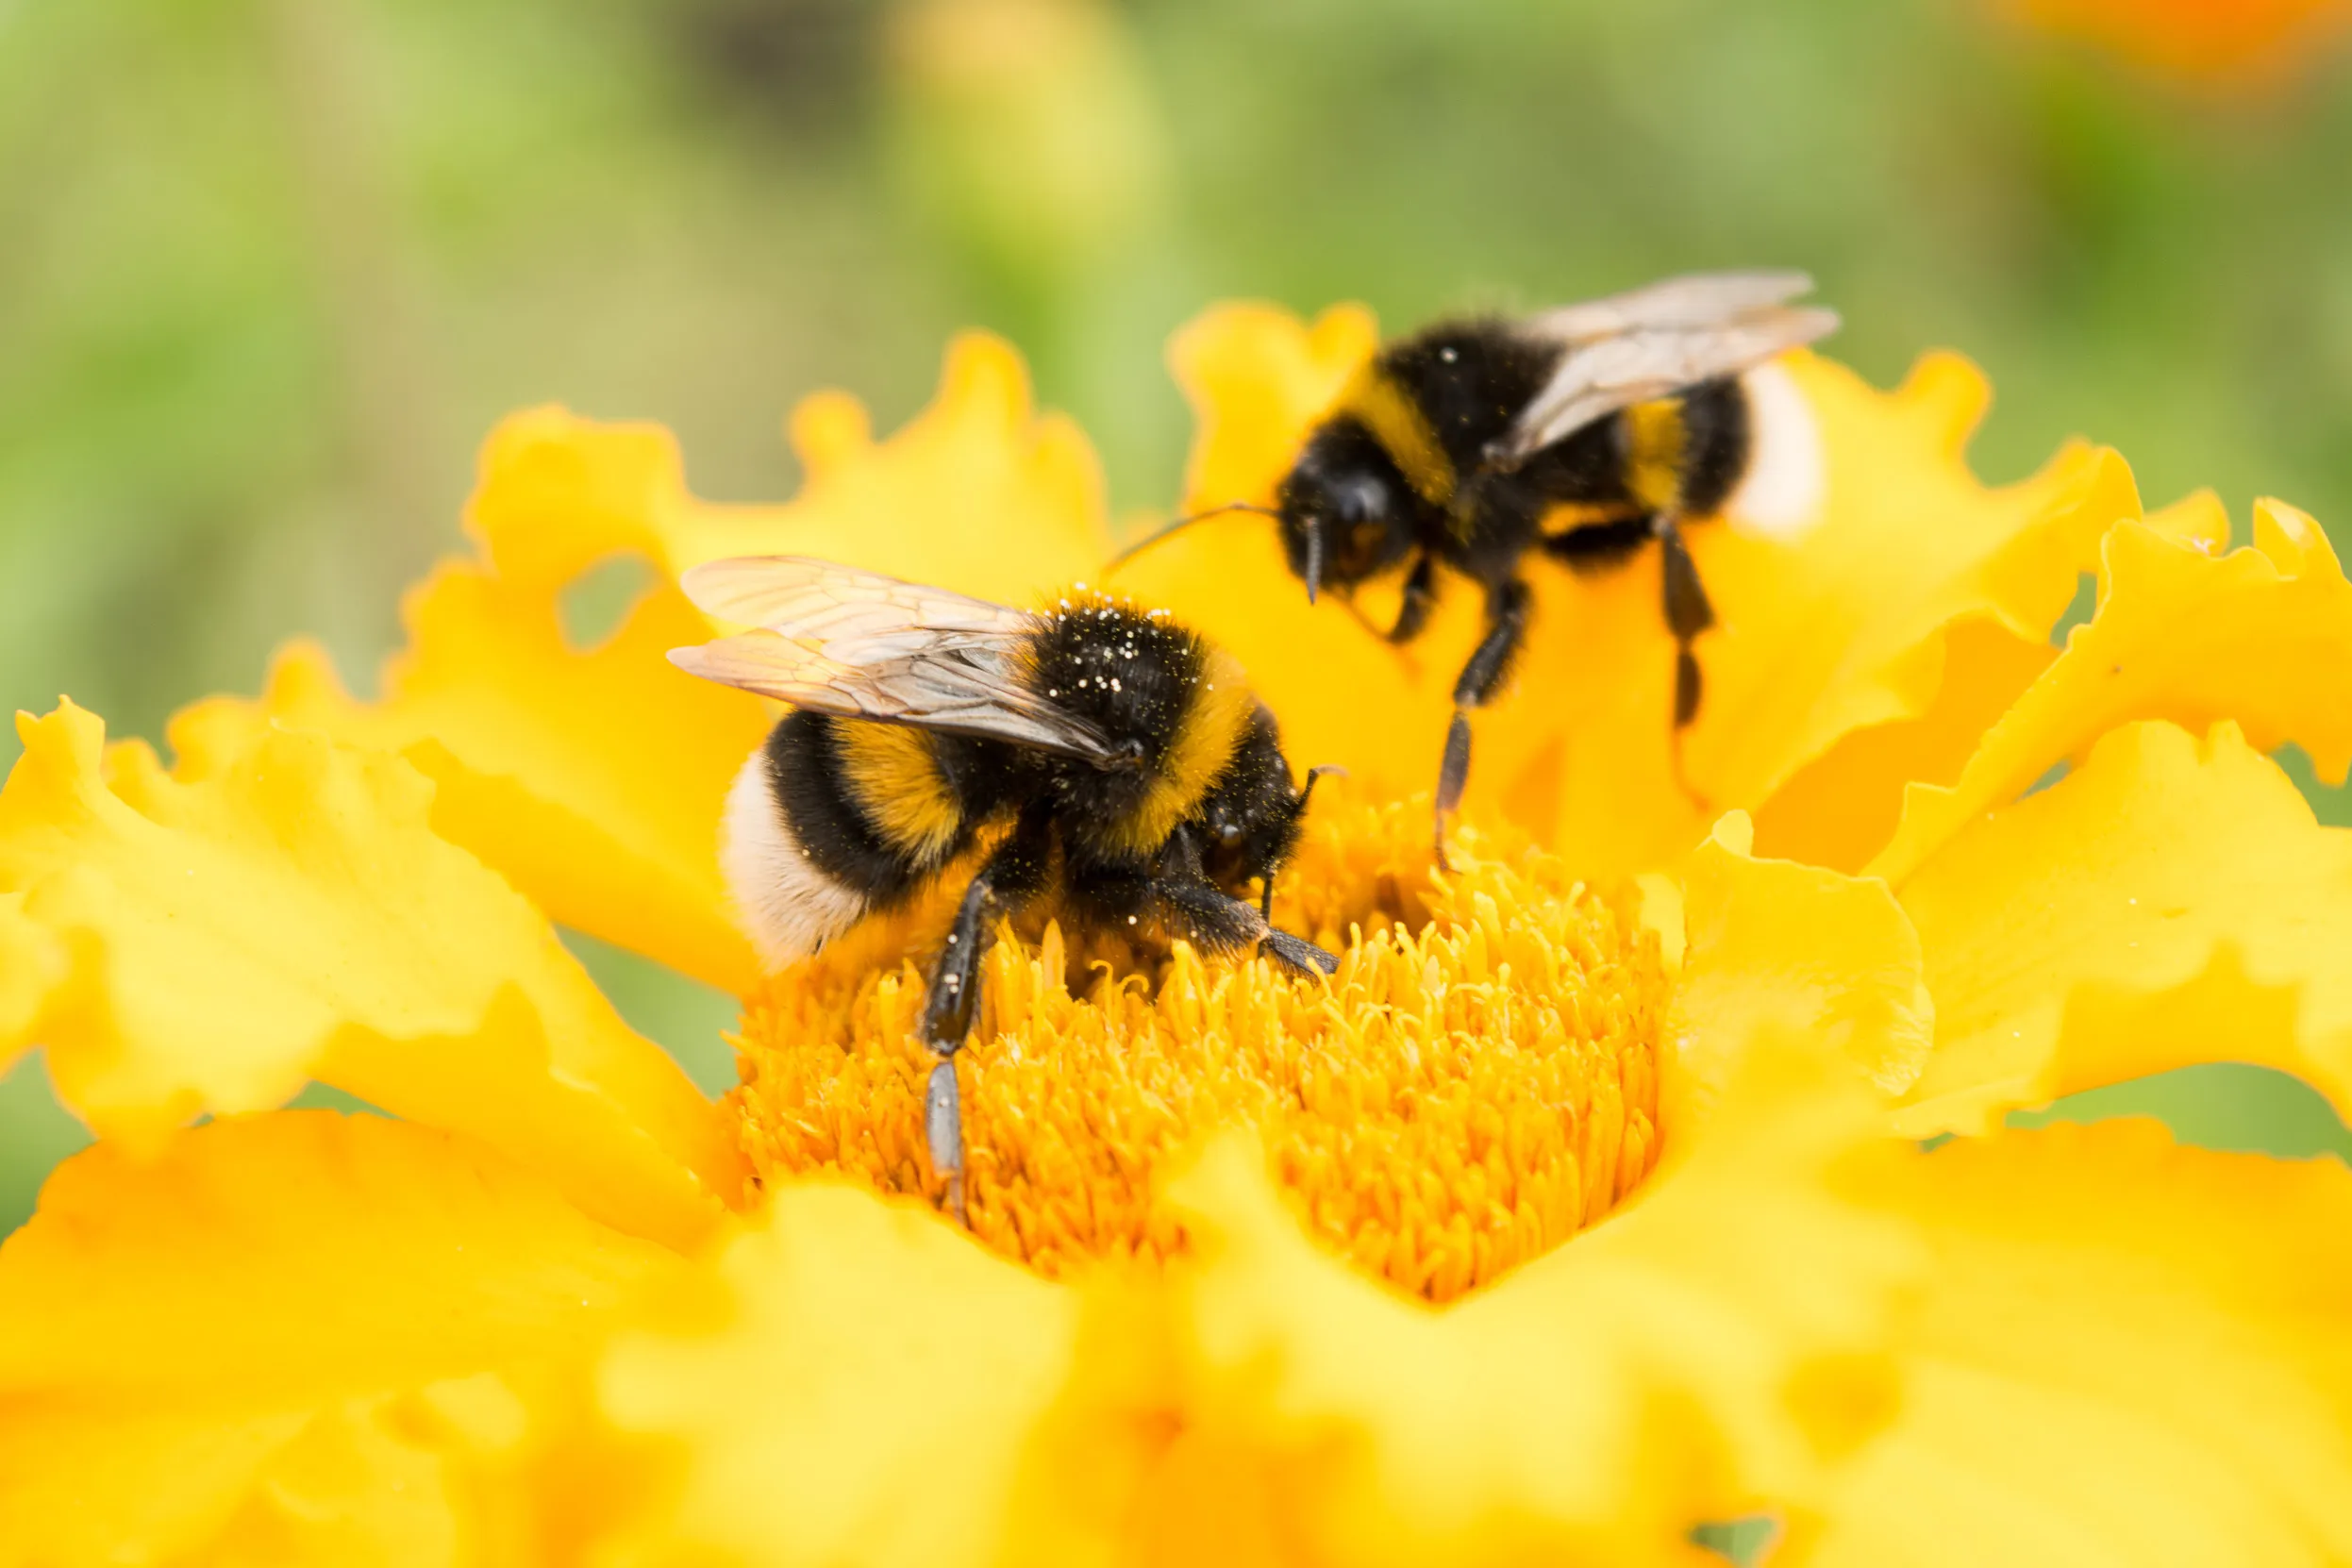 Two Bumblebees feeding off of nectar in the centre of a flat, bright yellow flower